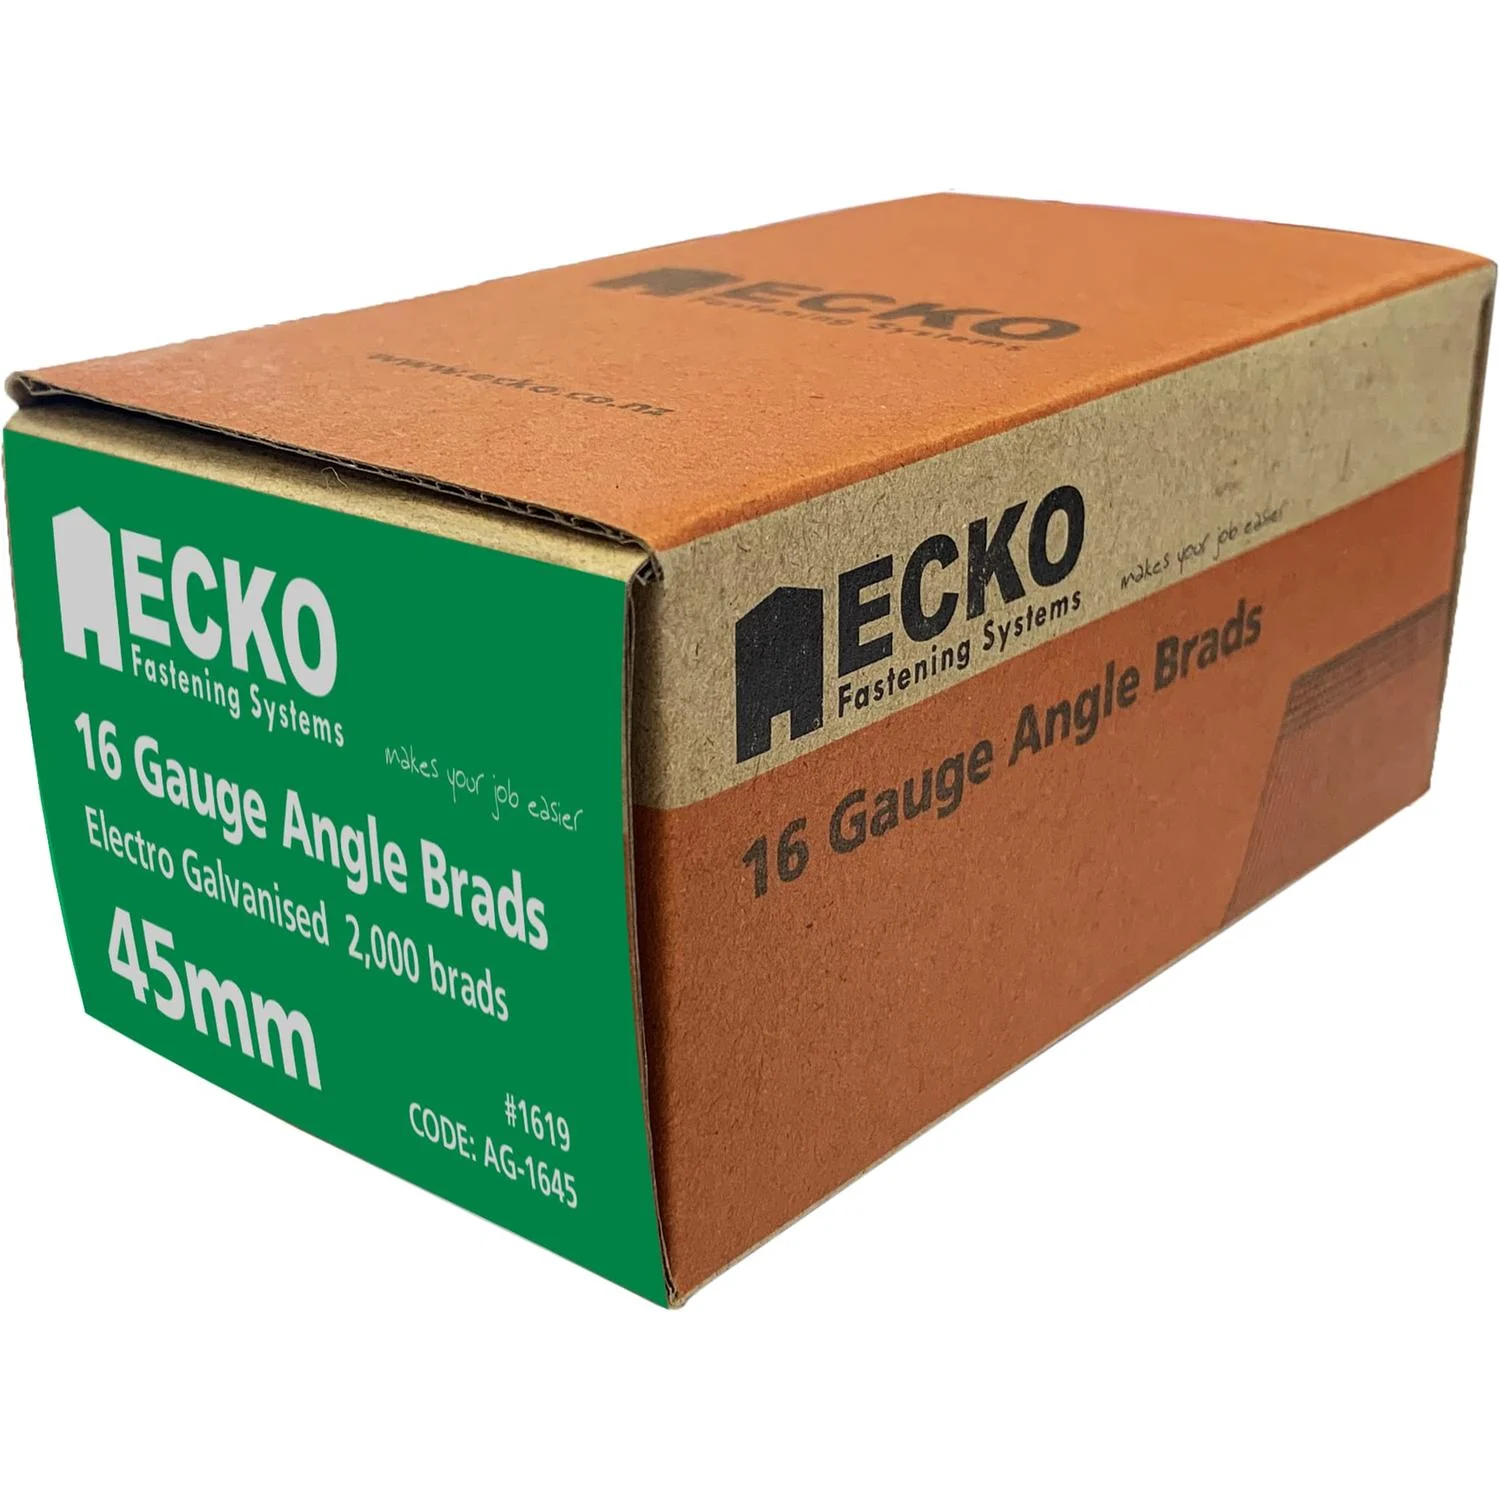 Ecko 16 Gauge Angle Brads Gasless Pack 45 X 1.6Mm Electro Galvanised (2000)